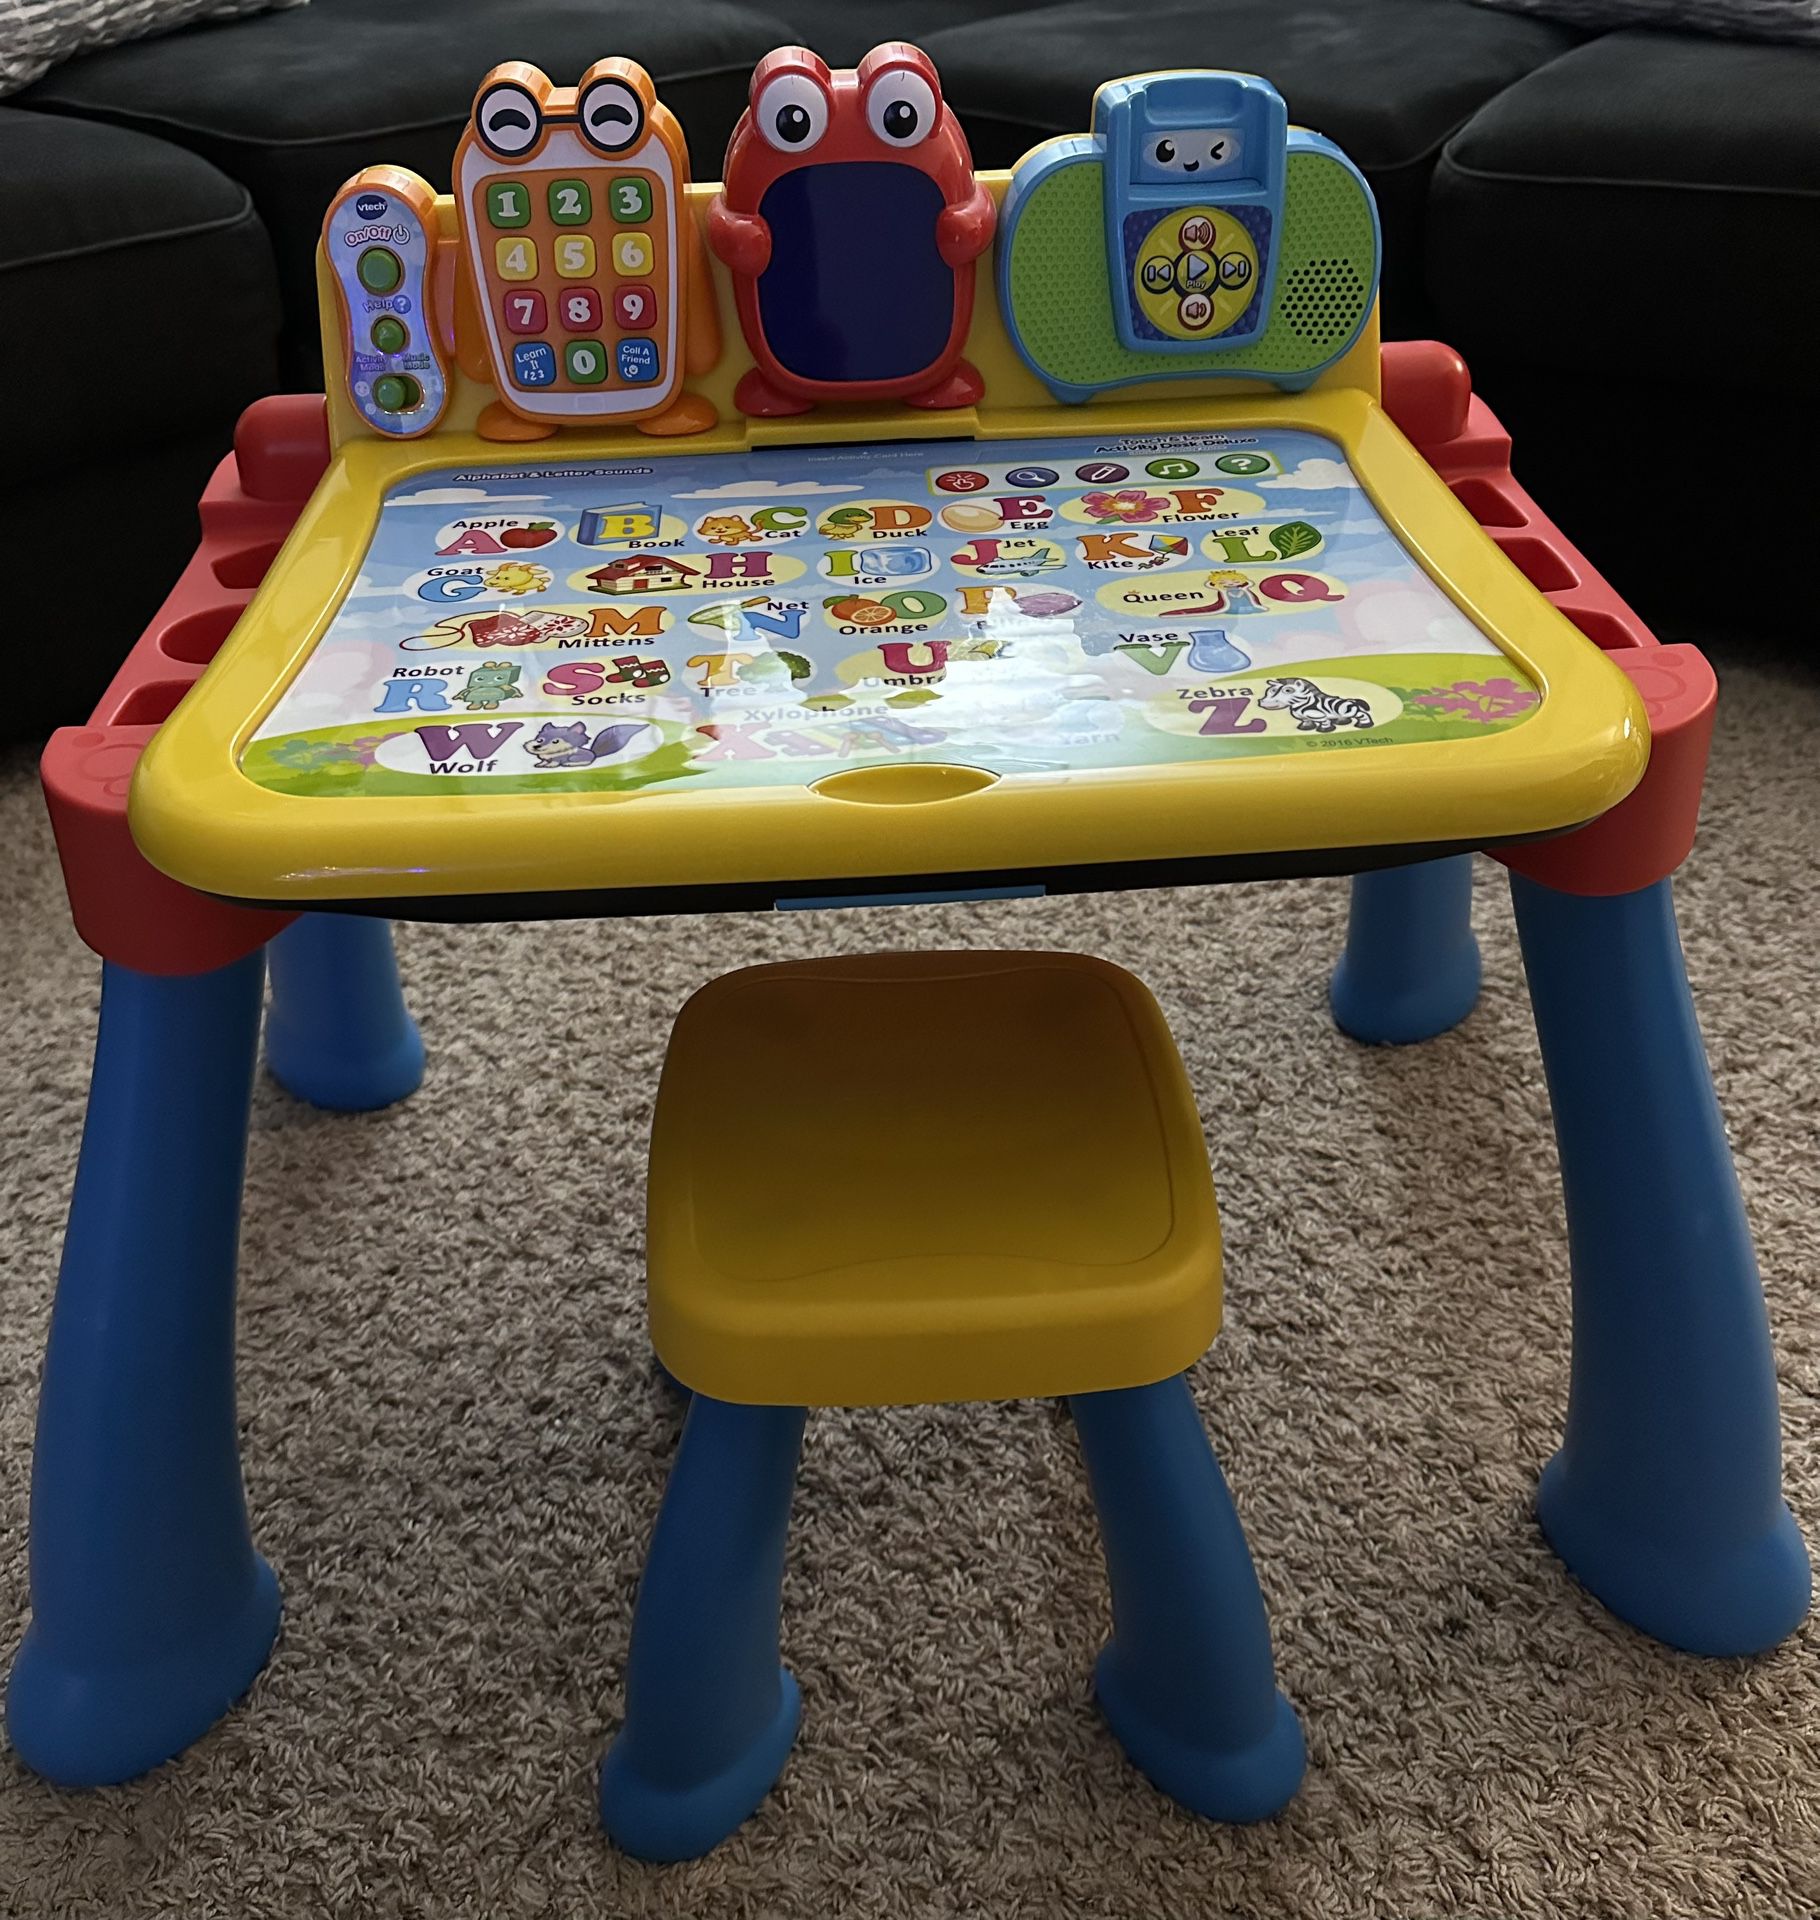 Vtech Touch & Learn 3-in-1 Activity Desk